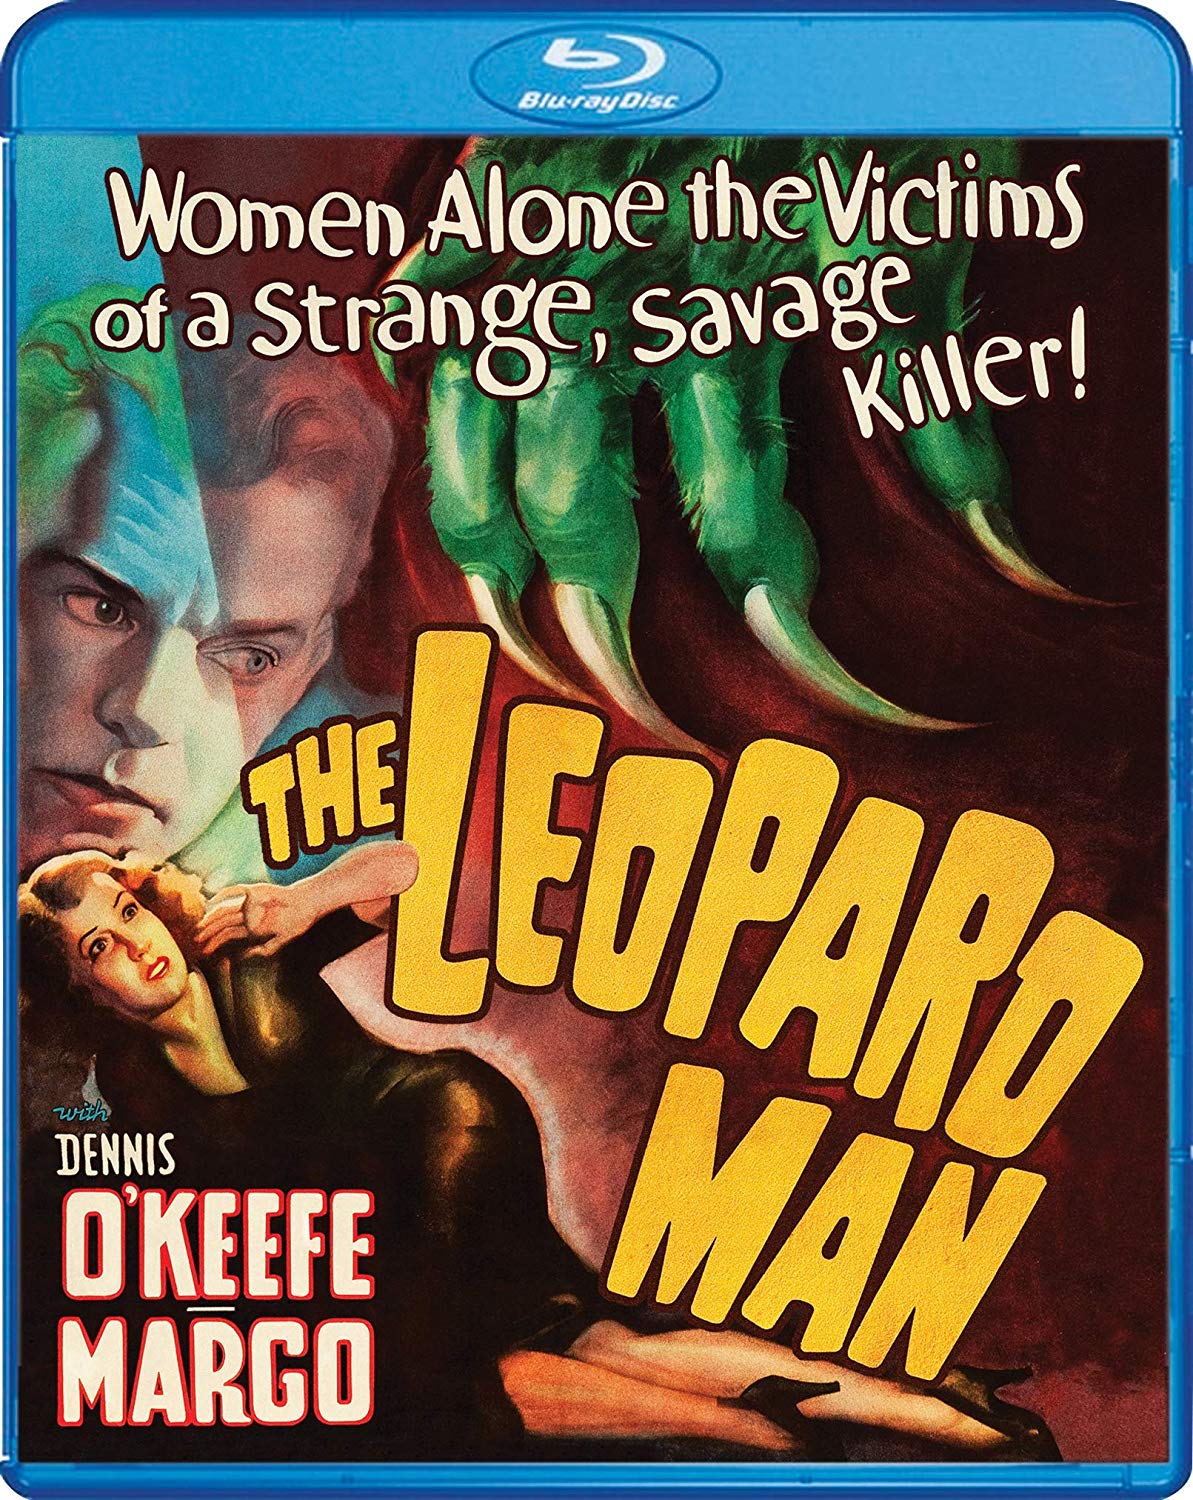 Movie quotes from Val Lewton's The Leopard Man